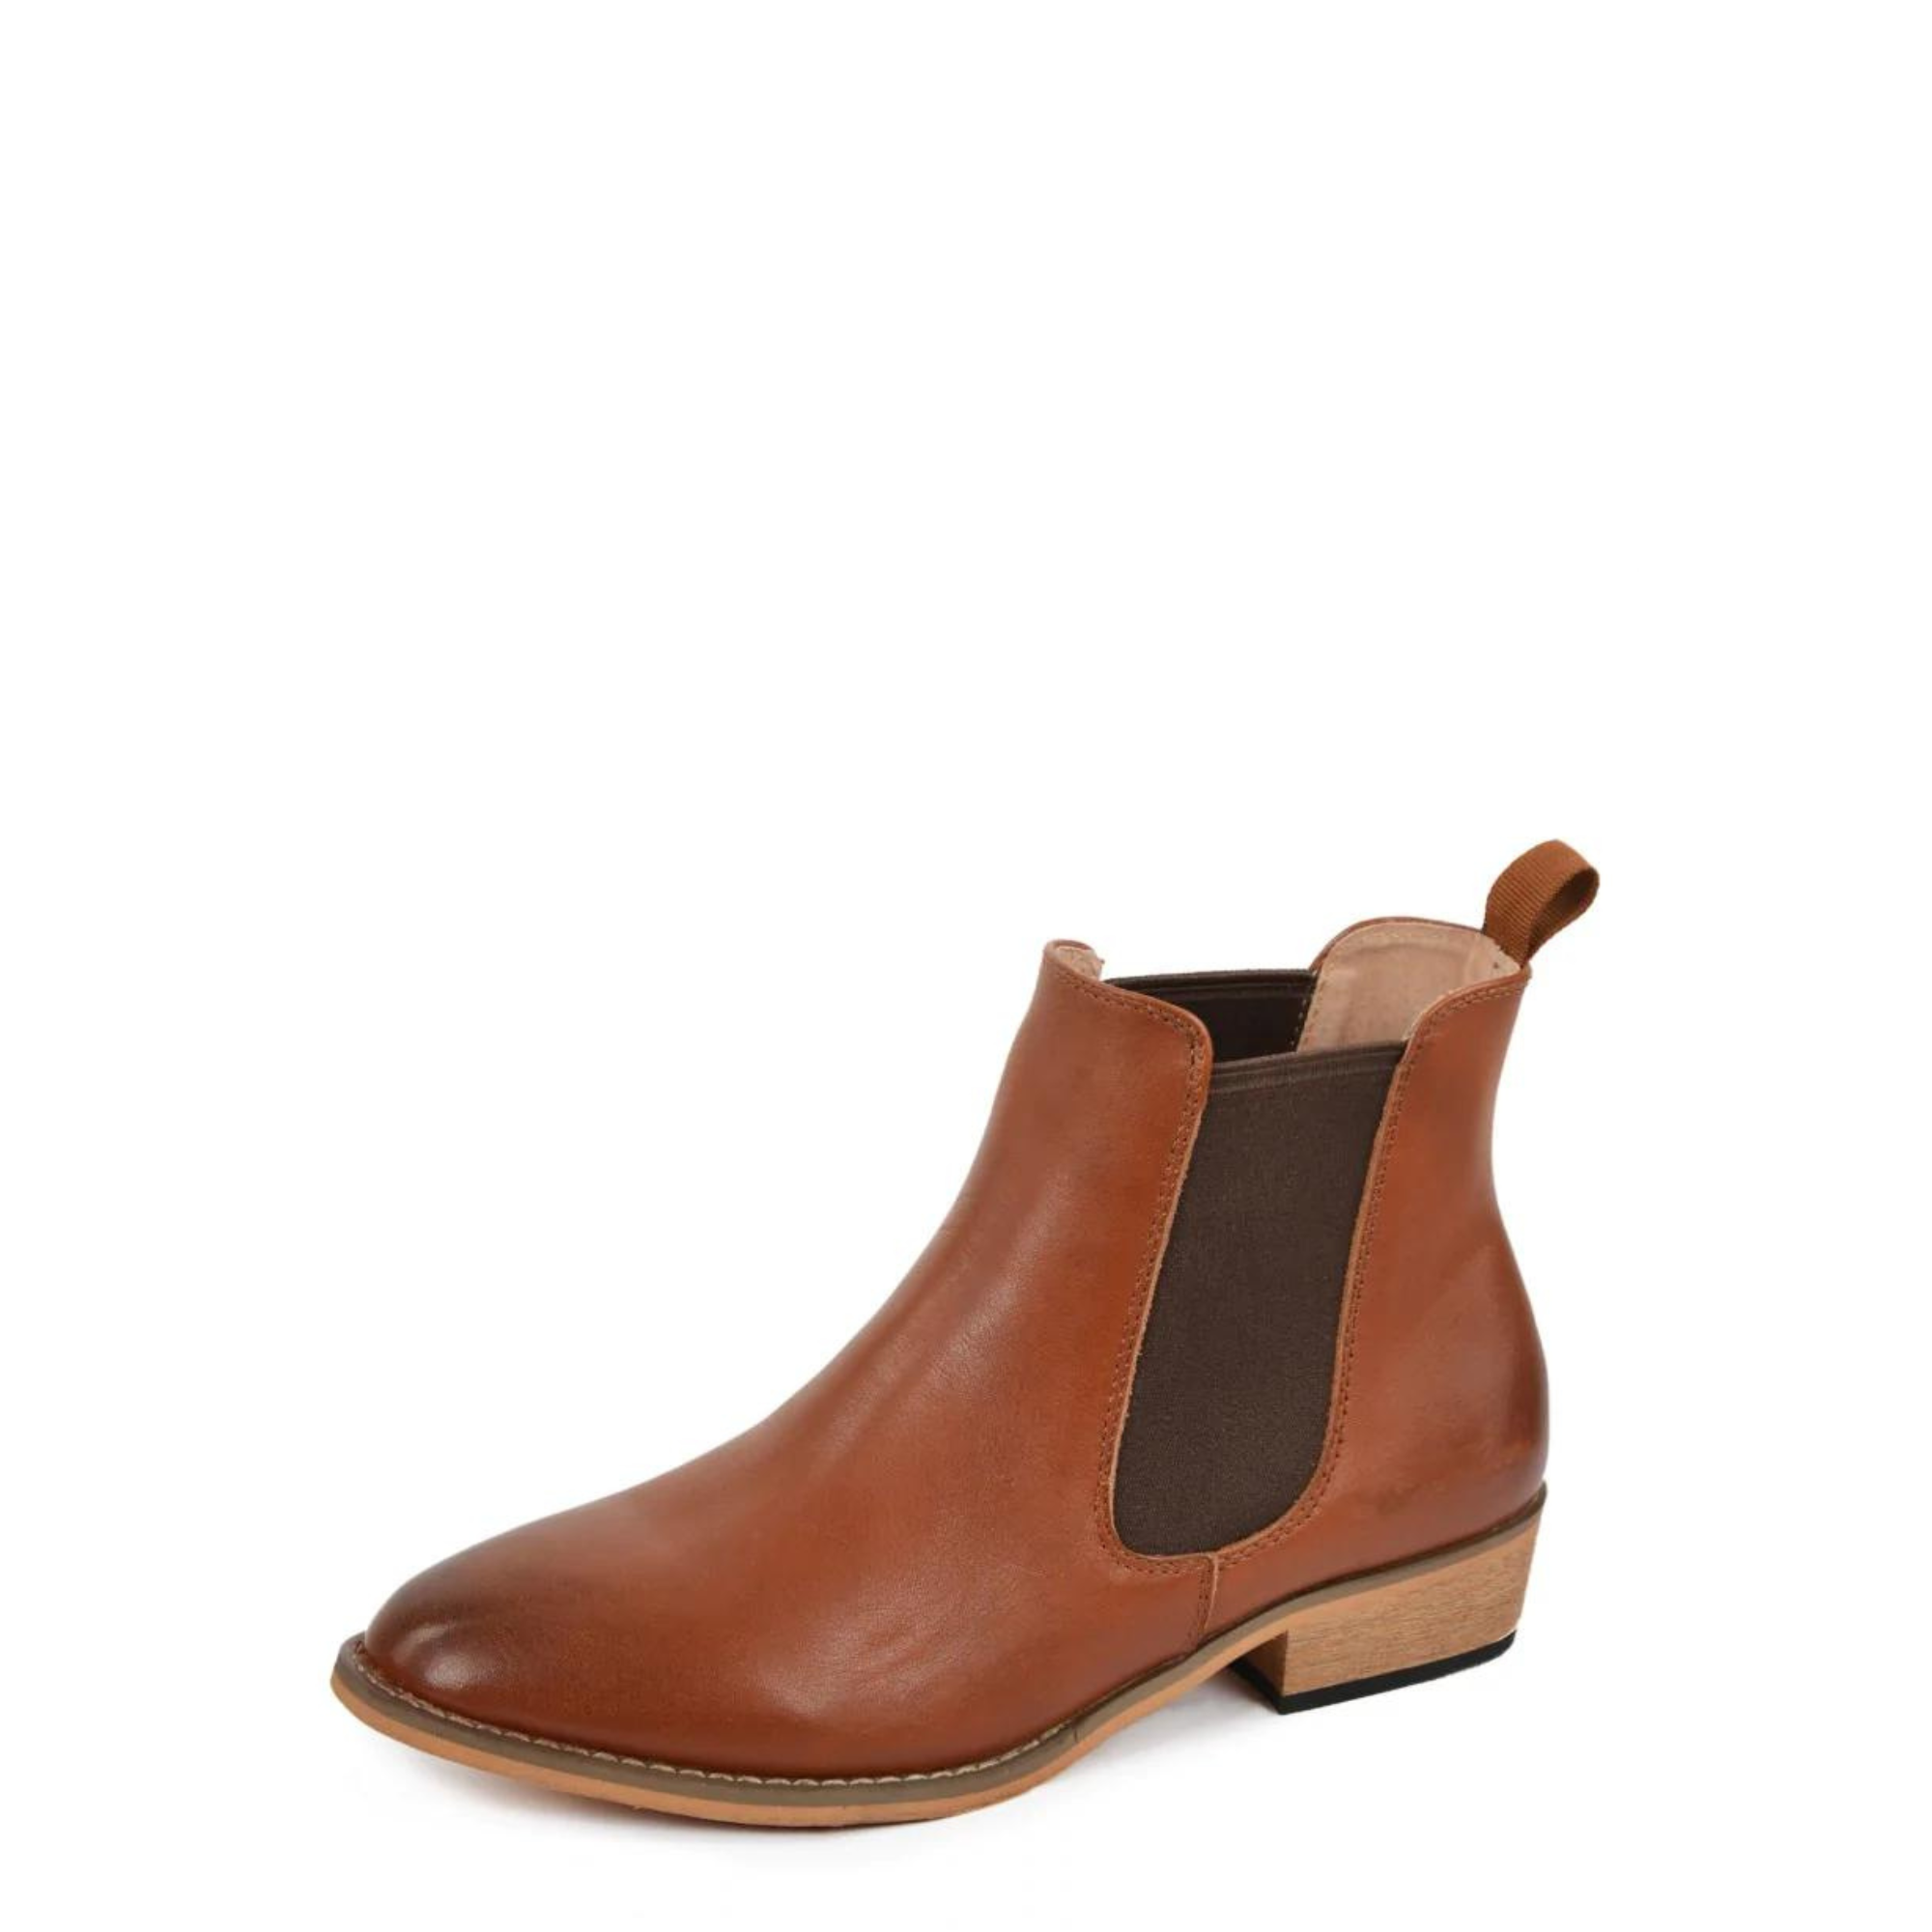 Thomas Cook Womens Chelsea Boot